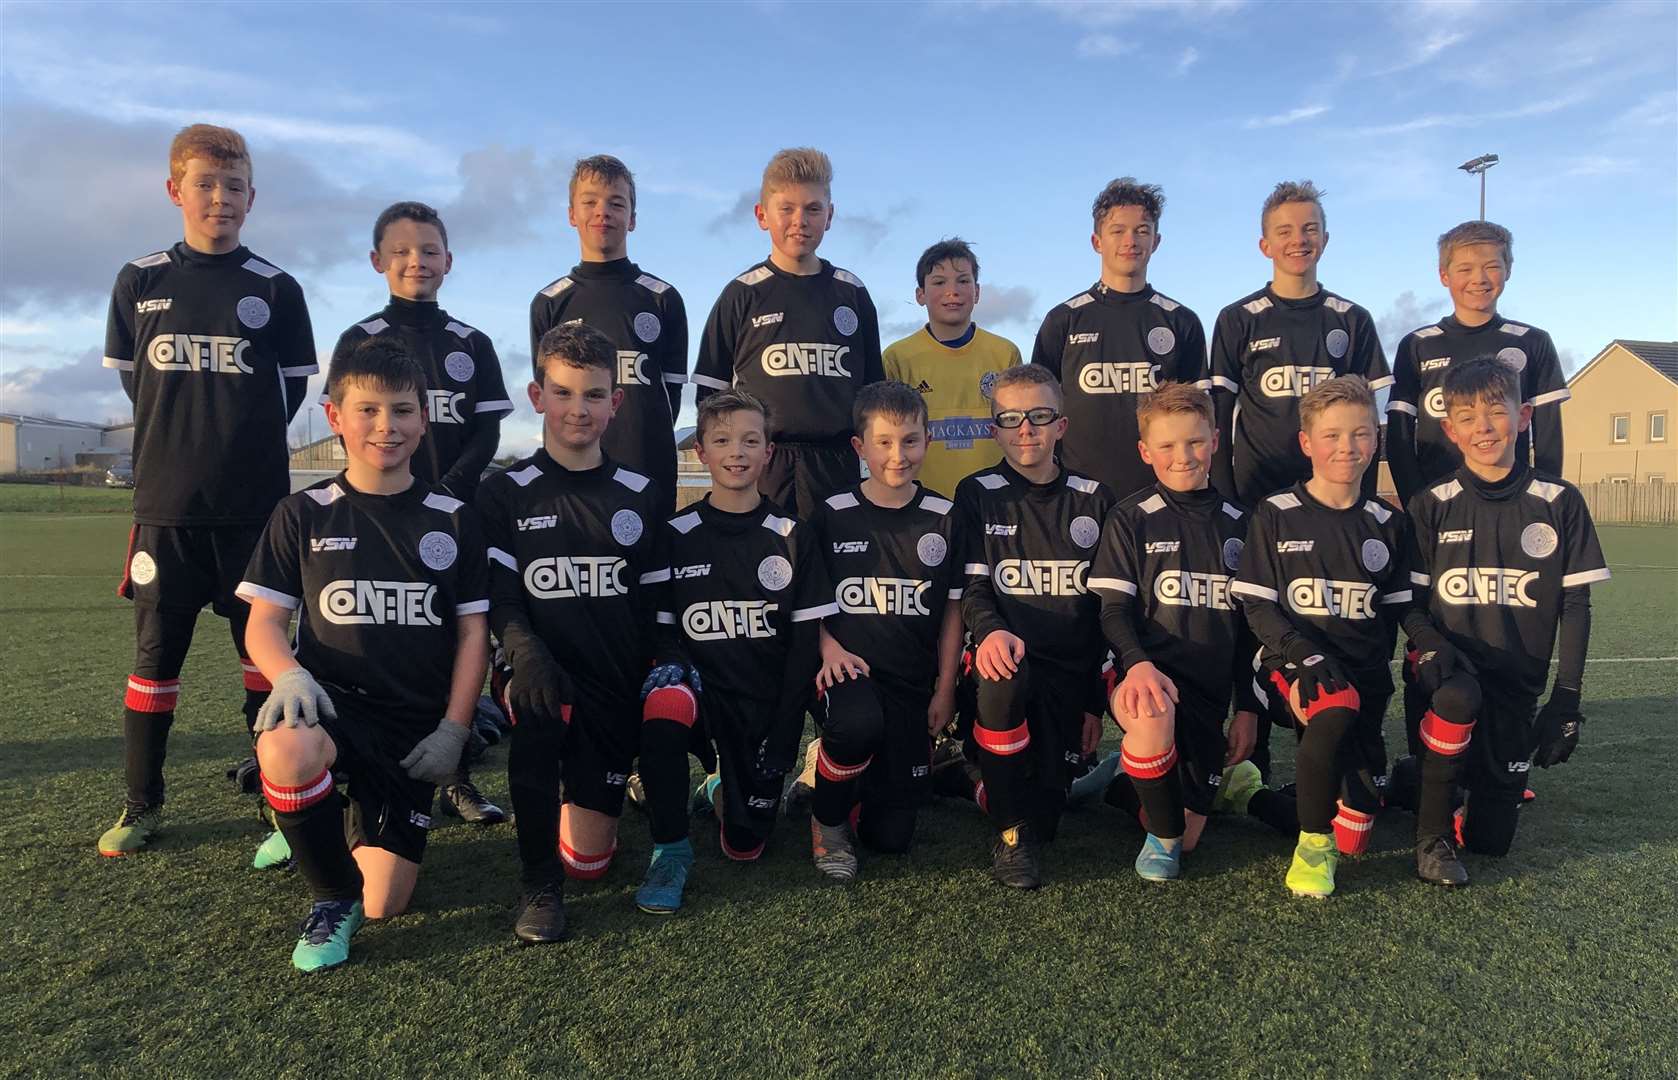 Flashback to December – the Caithness United U13 side who defeated Do Soccer from Tain to confirm their 'invincibles' status for 2019, as they finished off their year in the Moray Firth Youth Development League with a 4-0 victory. Back (from left): Morgan Kennedy, Alfie Miller, Lee Gordon, Matthew Robertson, Tom Armitage, Euan Kennedy (captain), Joshua Hughes, Sam Reid. Front: Steven Esson, Sam Shearer, Jed Armitage, Finlay Bain, Matthew Mackay, Jayden Bremner, Scott McDonald and Lewis Swan.